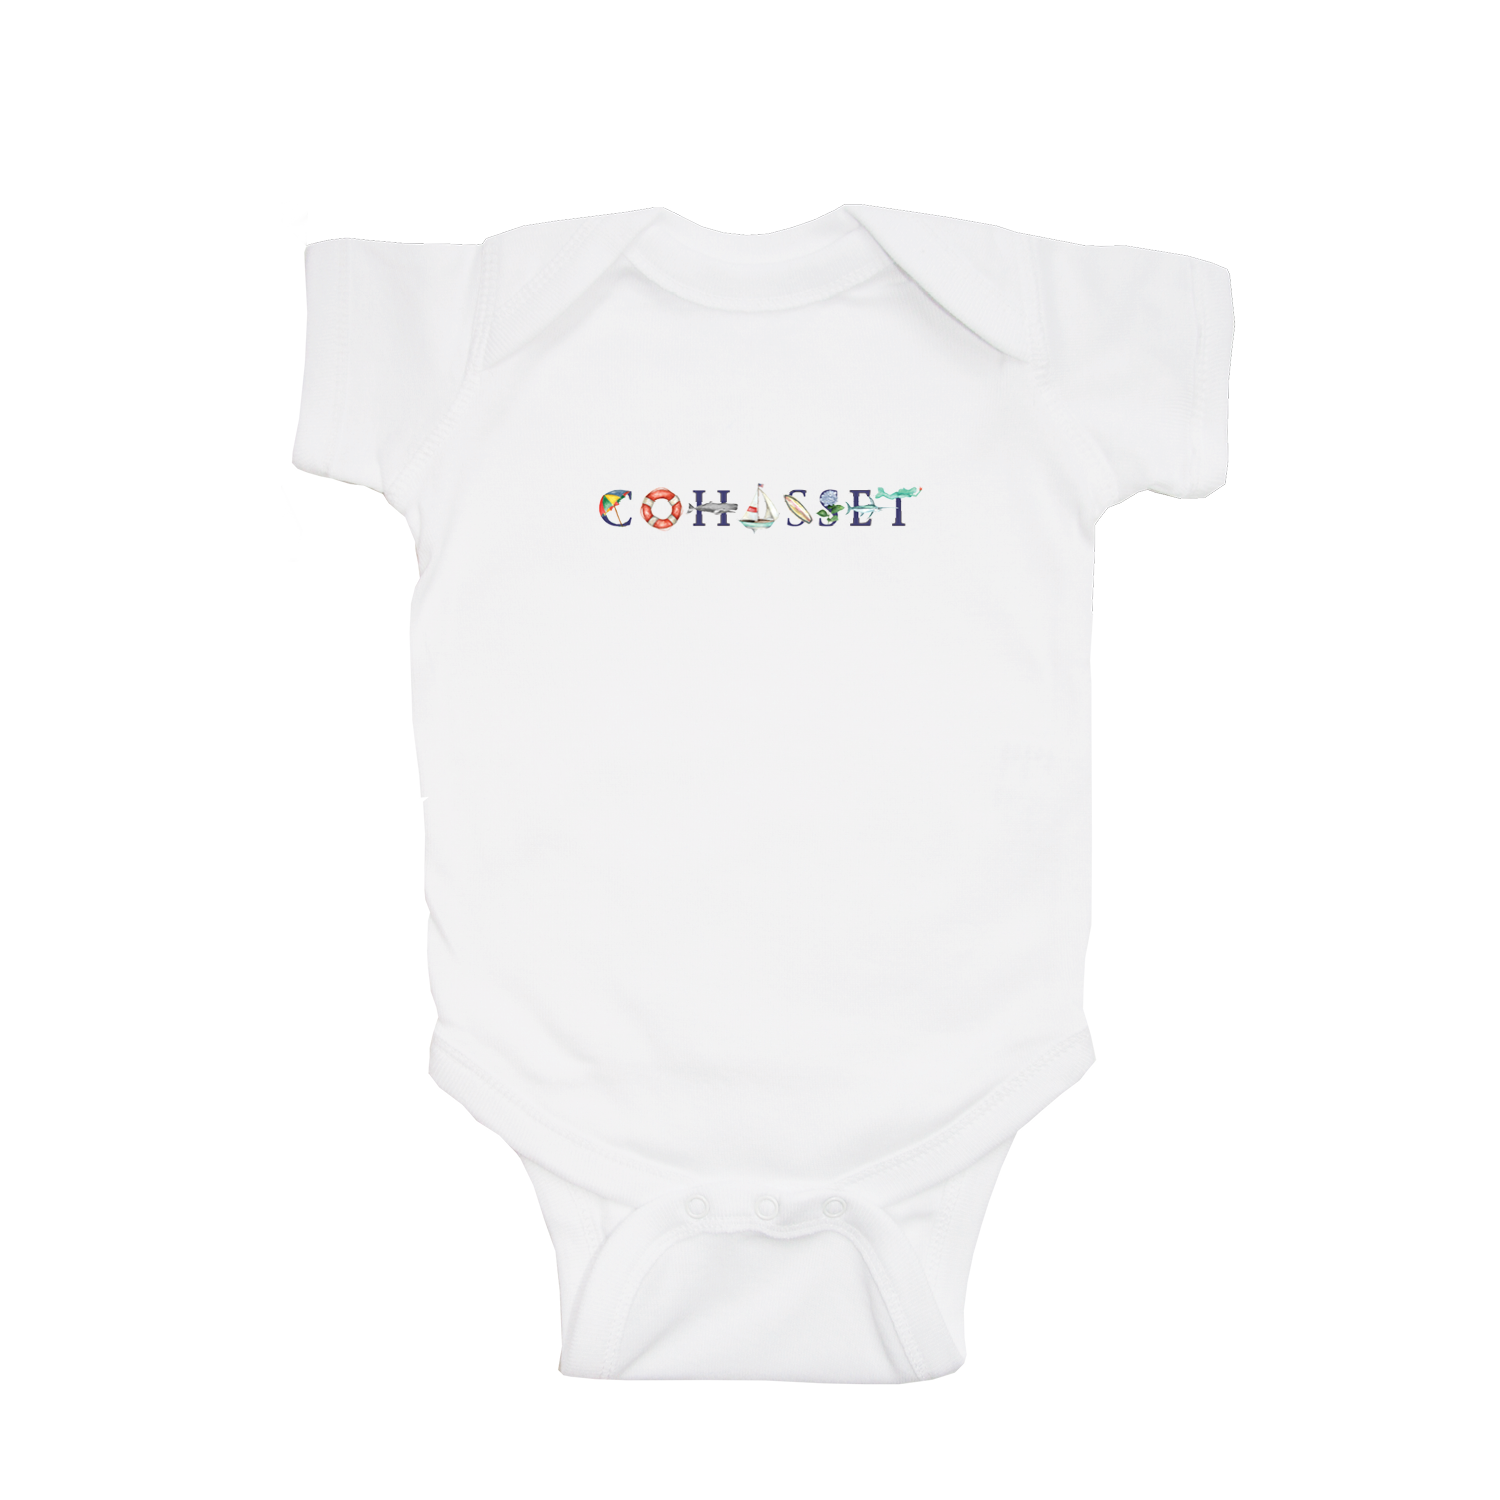 Cohasset baby snap up short sleeve